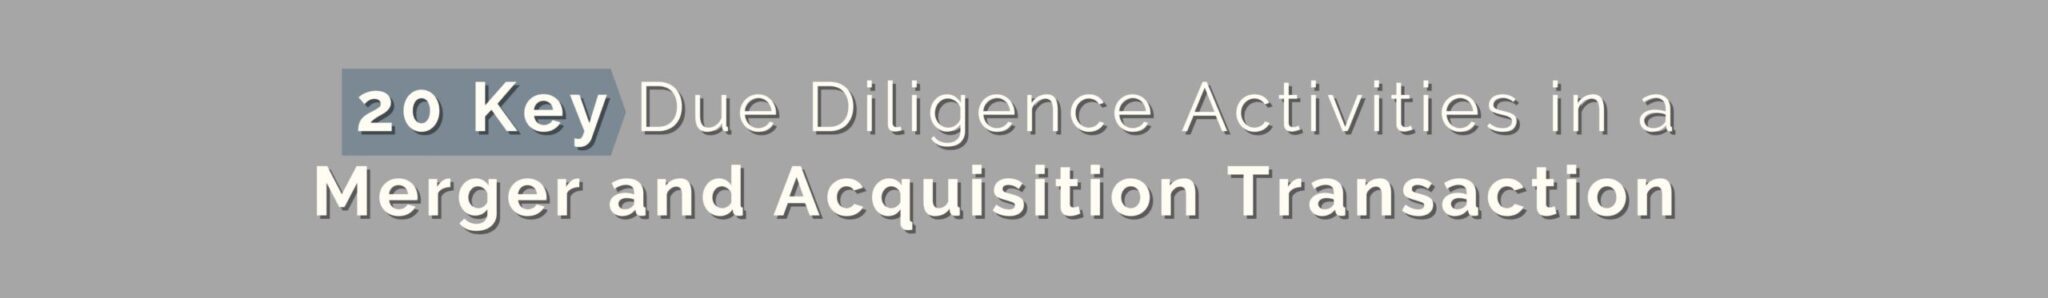 acquisition-merger-information-due-diligence